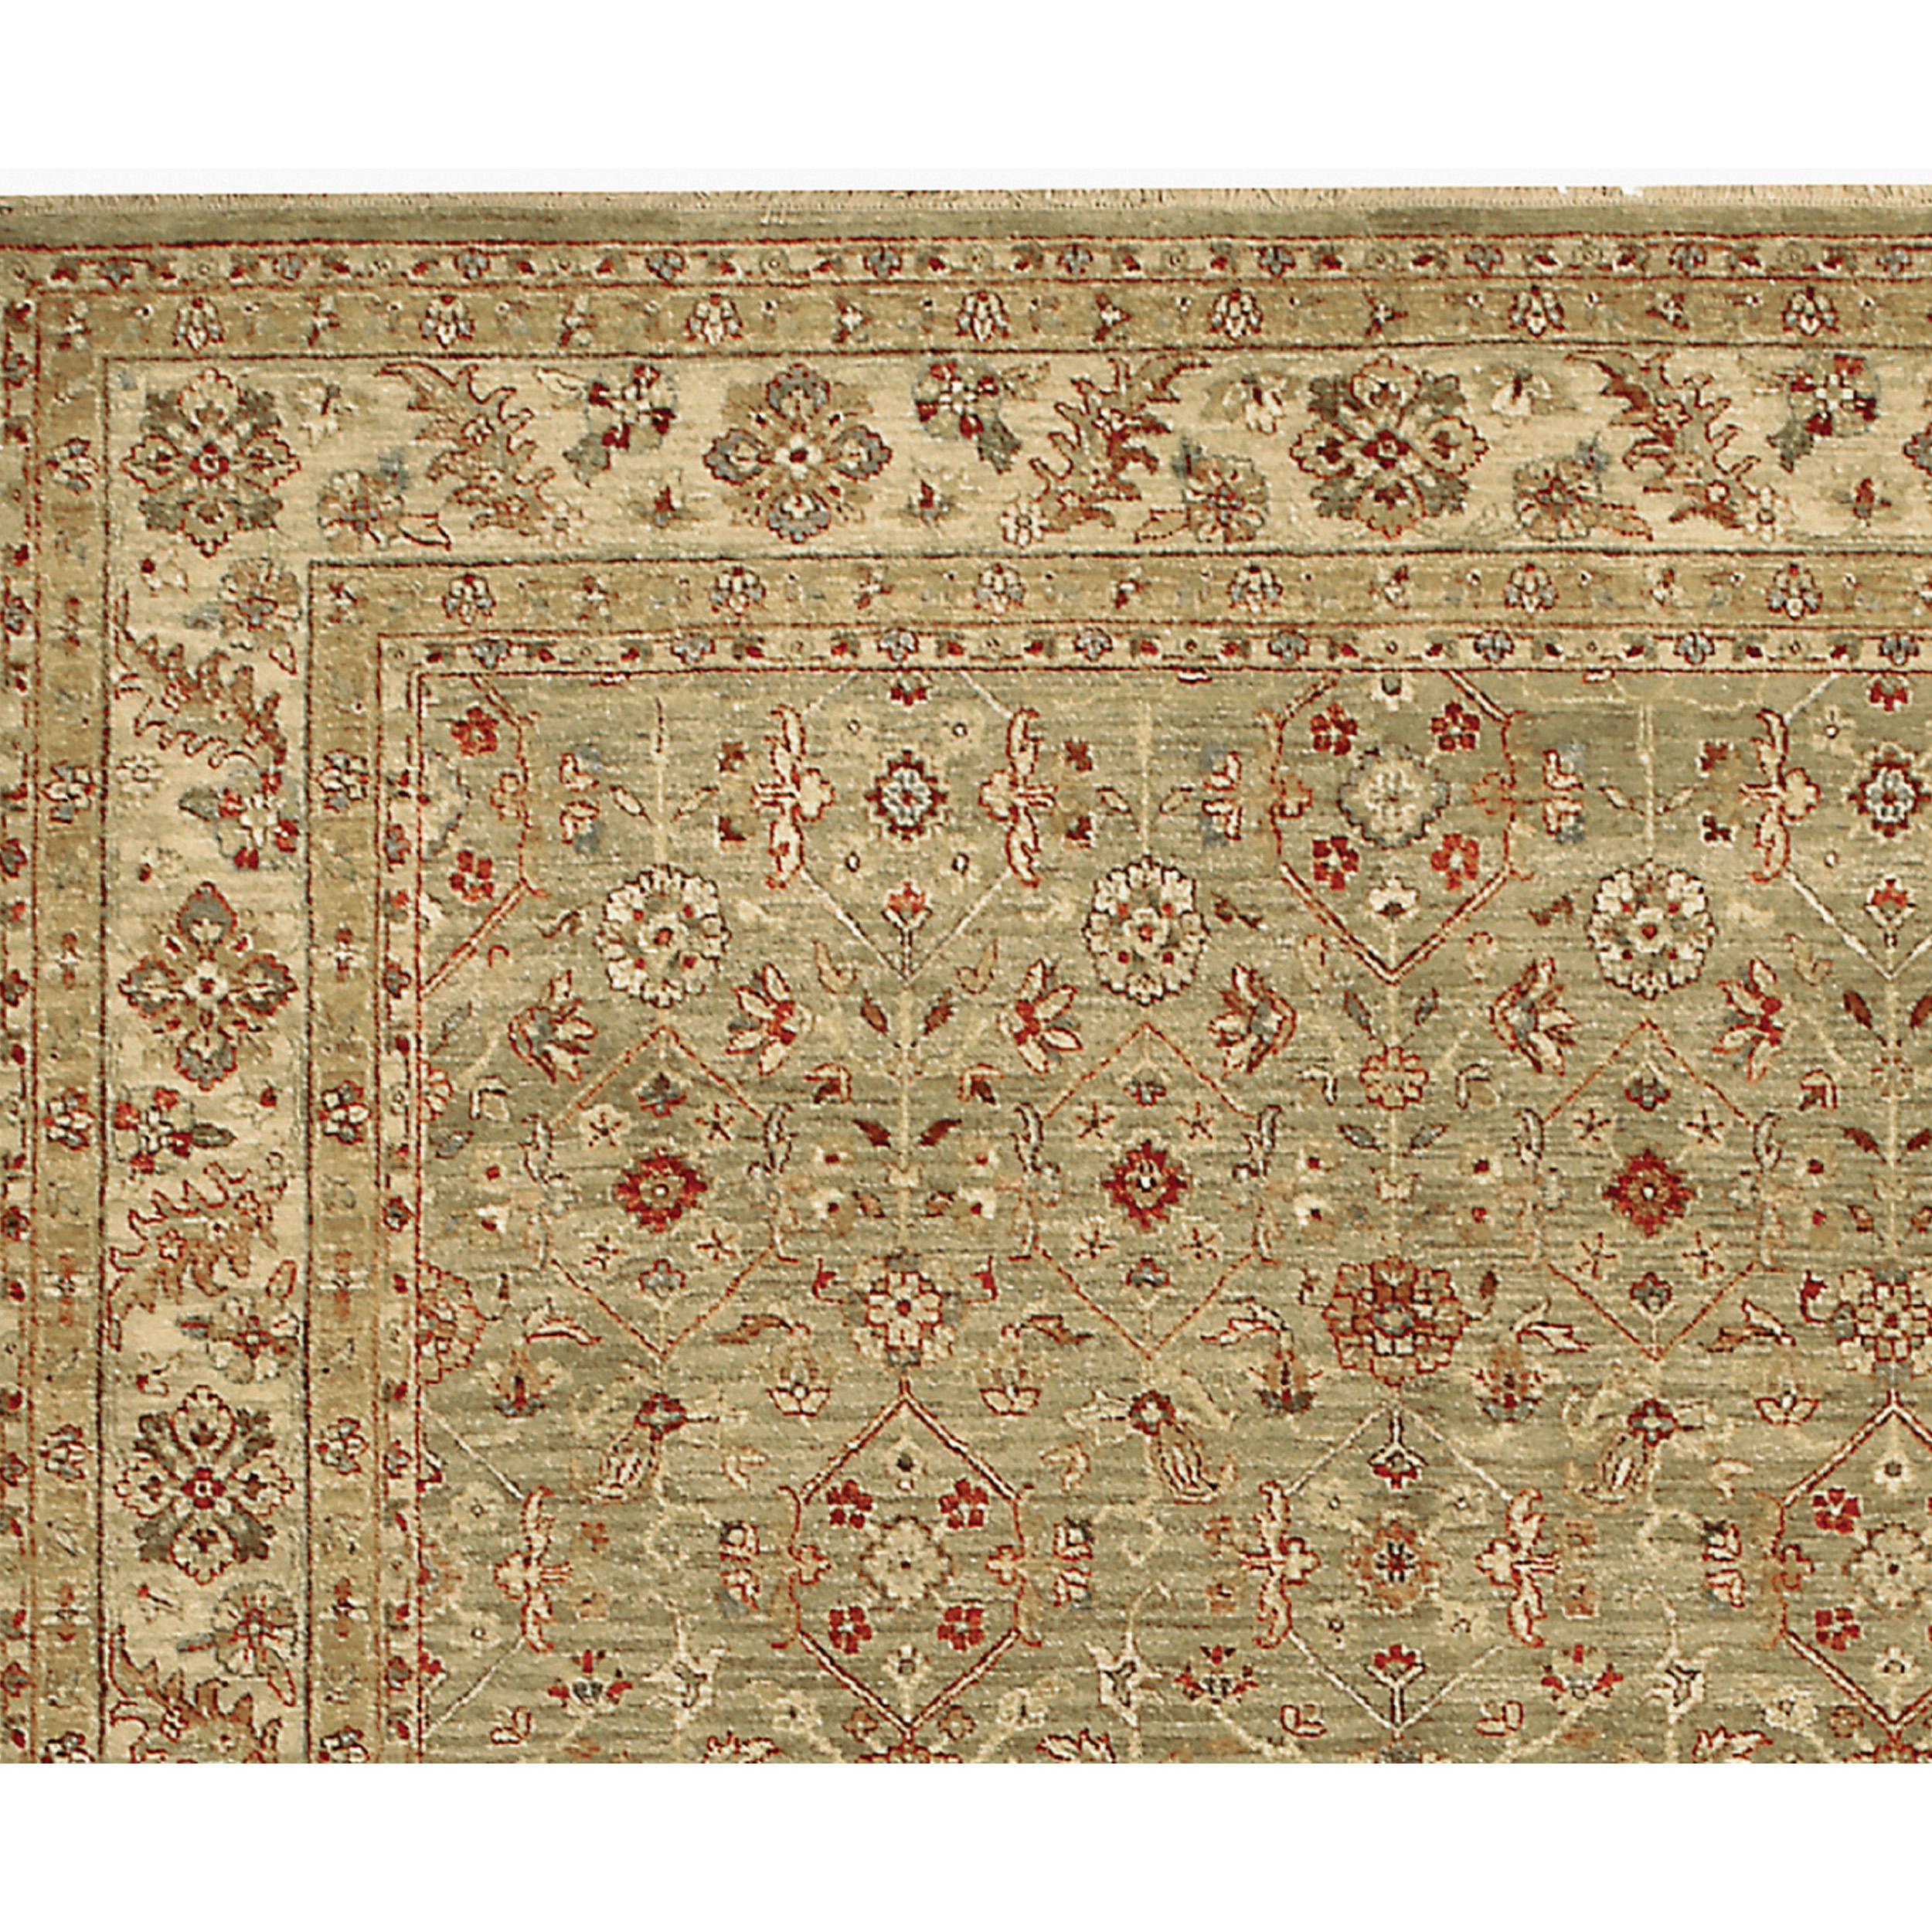 Meticulously crafted, this rug employs the most intricate traditional weaving techniques in India, guided by the expertise of skilled artisans. Each rug is a labor of love, with handweavers dedicating countless hours to knot-by-knot, bringing the